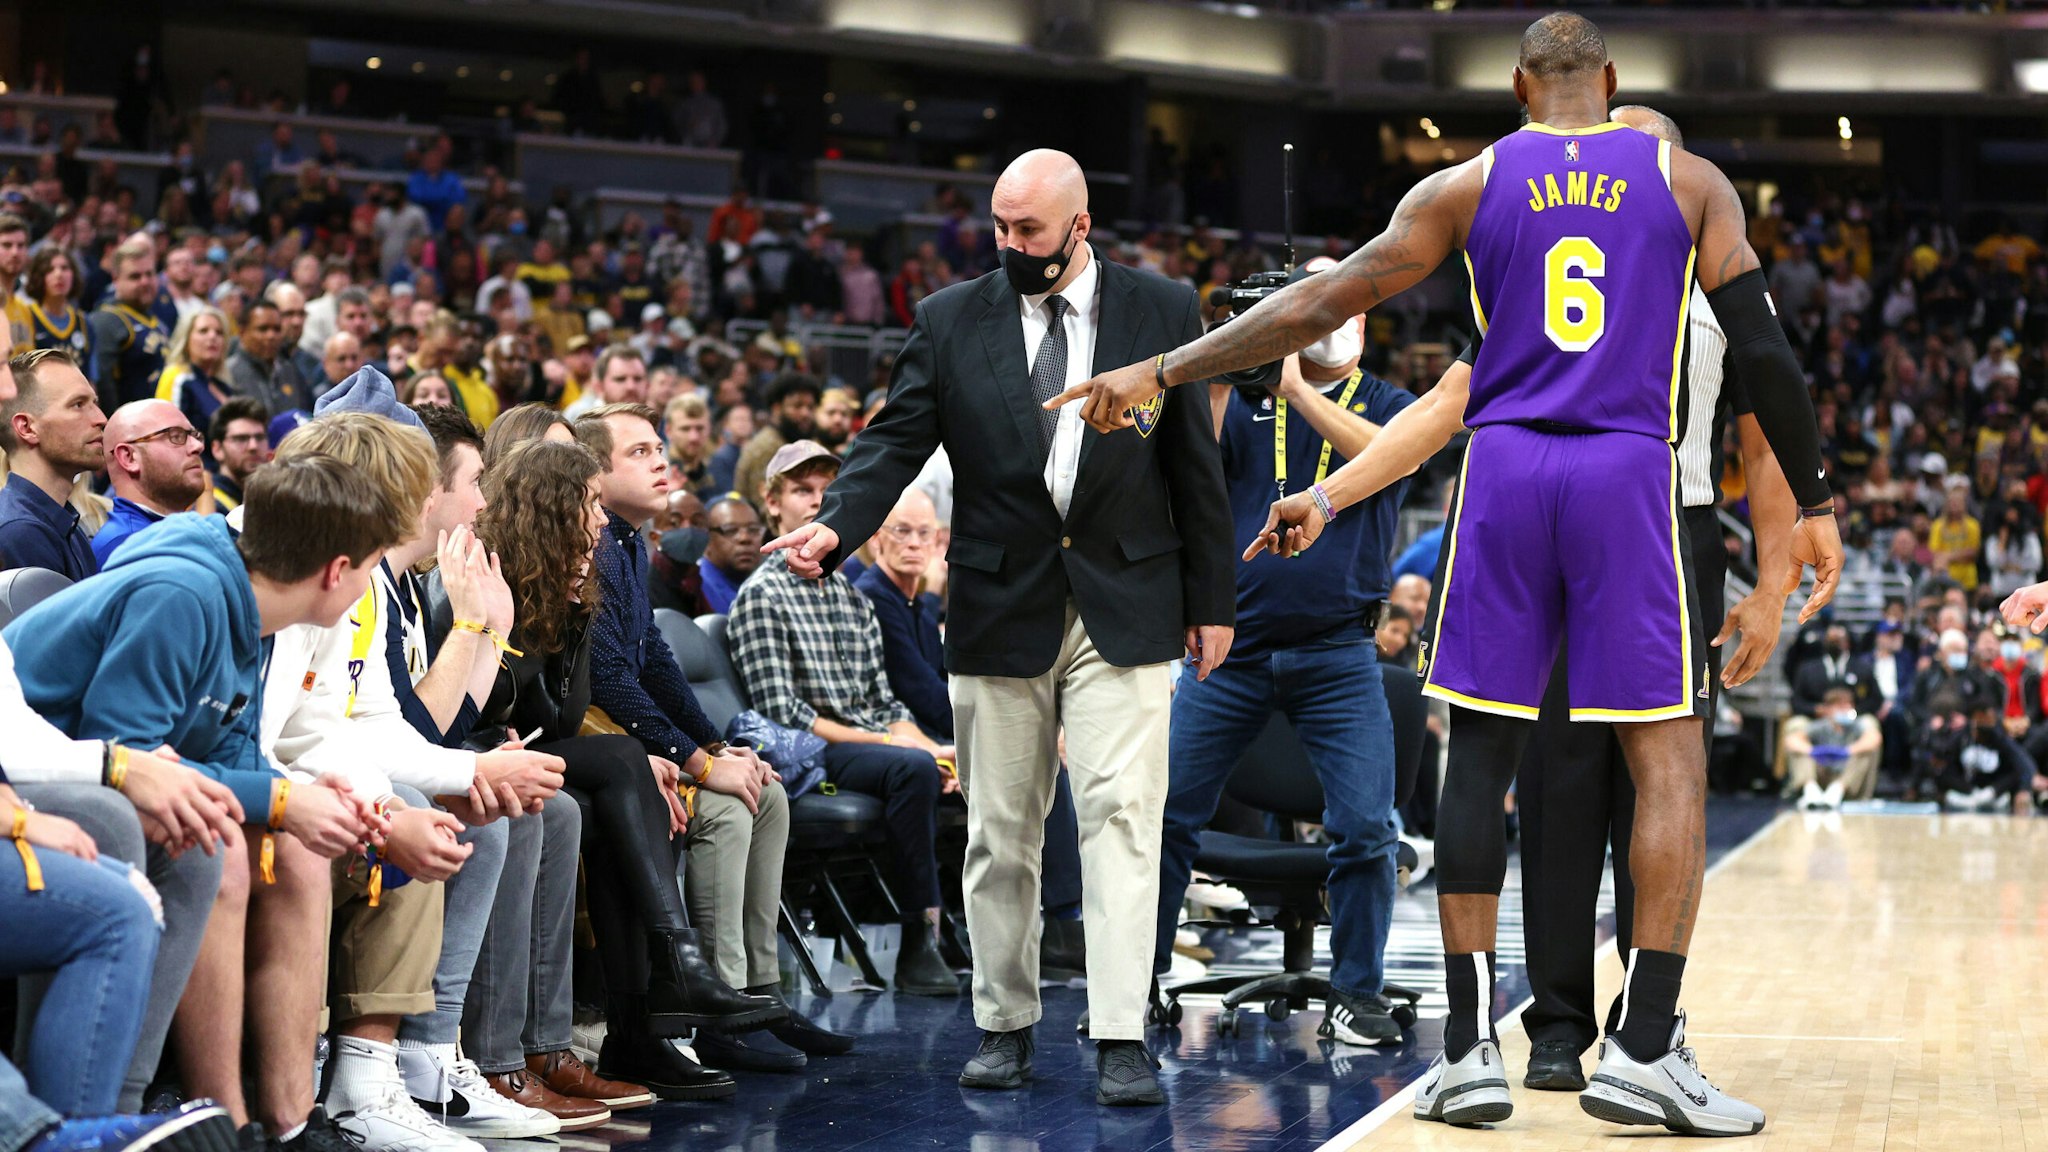 INDIANAPOLIS, INDIANA - NOVEMBER 24: LeBron James #6 of the Los Angeles Lakers points out fans that he had a disturbance with to security during the game against the Indiana Pacers at Gainbridge Fieldhouse on November 24, 2021 in Indianapolis, Indiana.